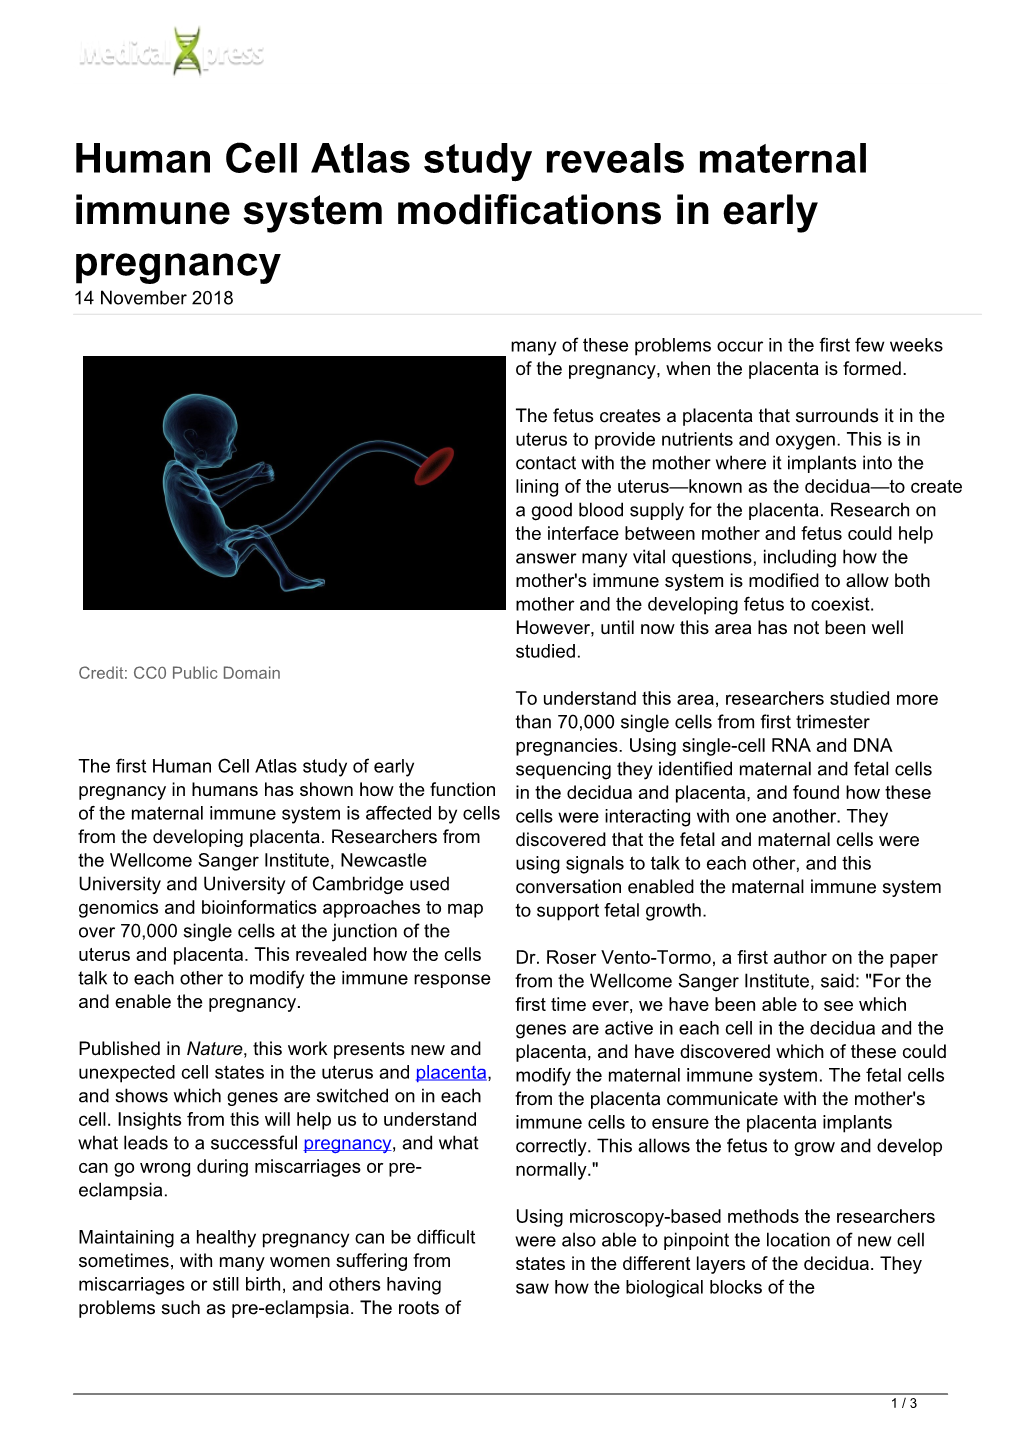 Human Cell Atlas Study Reveals Maternal Immune System Modifications in Early Pregnancy 14 November 2018